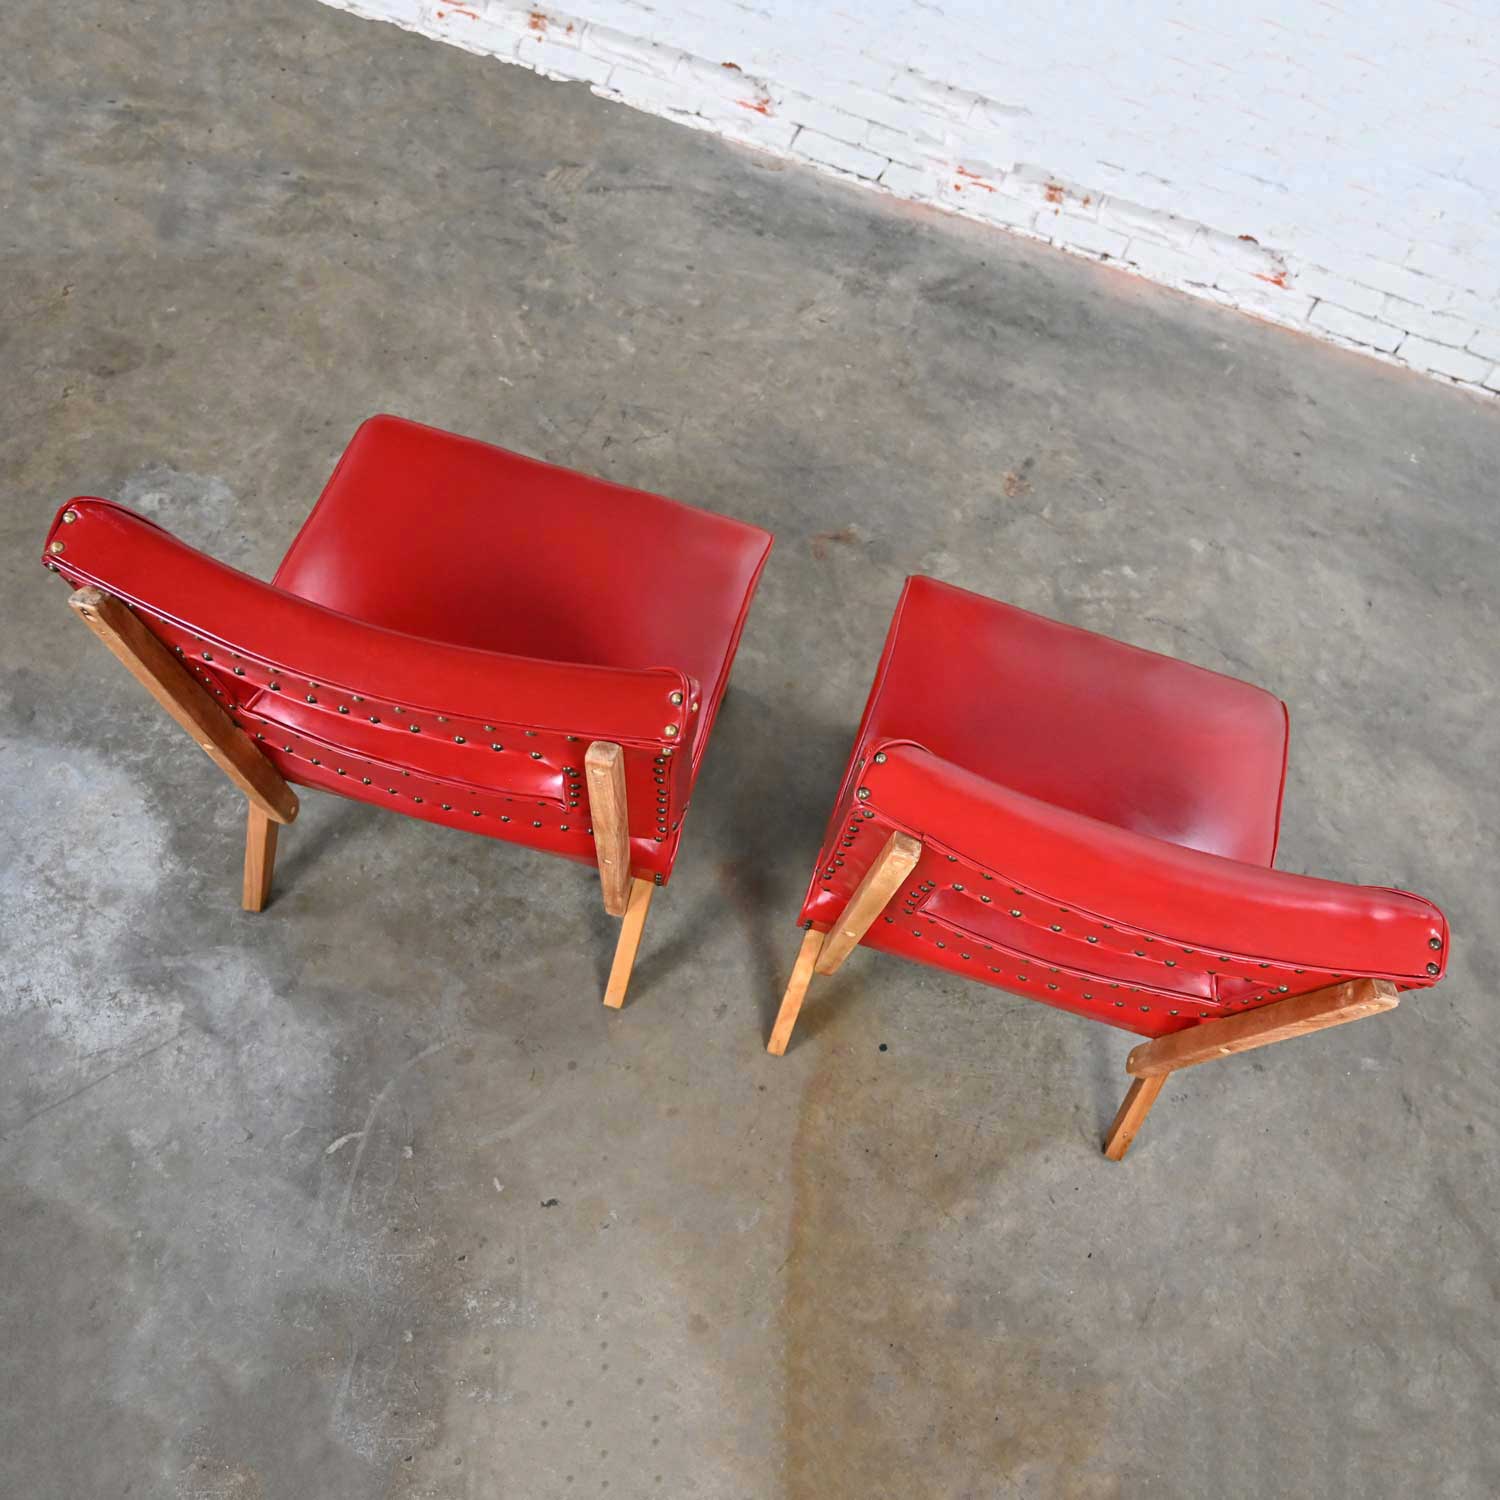 Vintage MCM Keyhole Back Original Red Faux Leather Slipper Chairs Attributed to Viking Artline a Pair